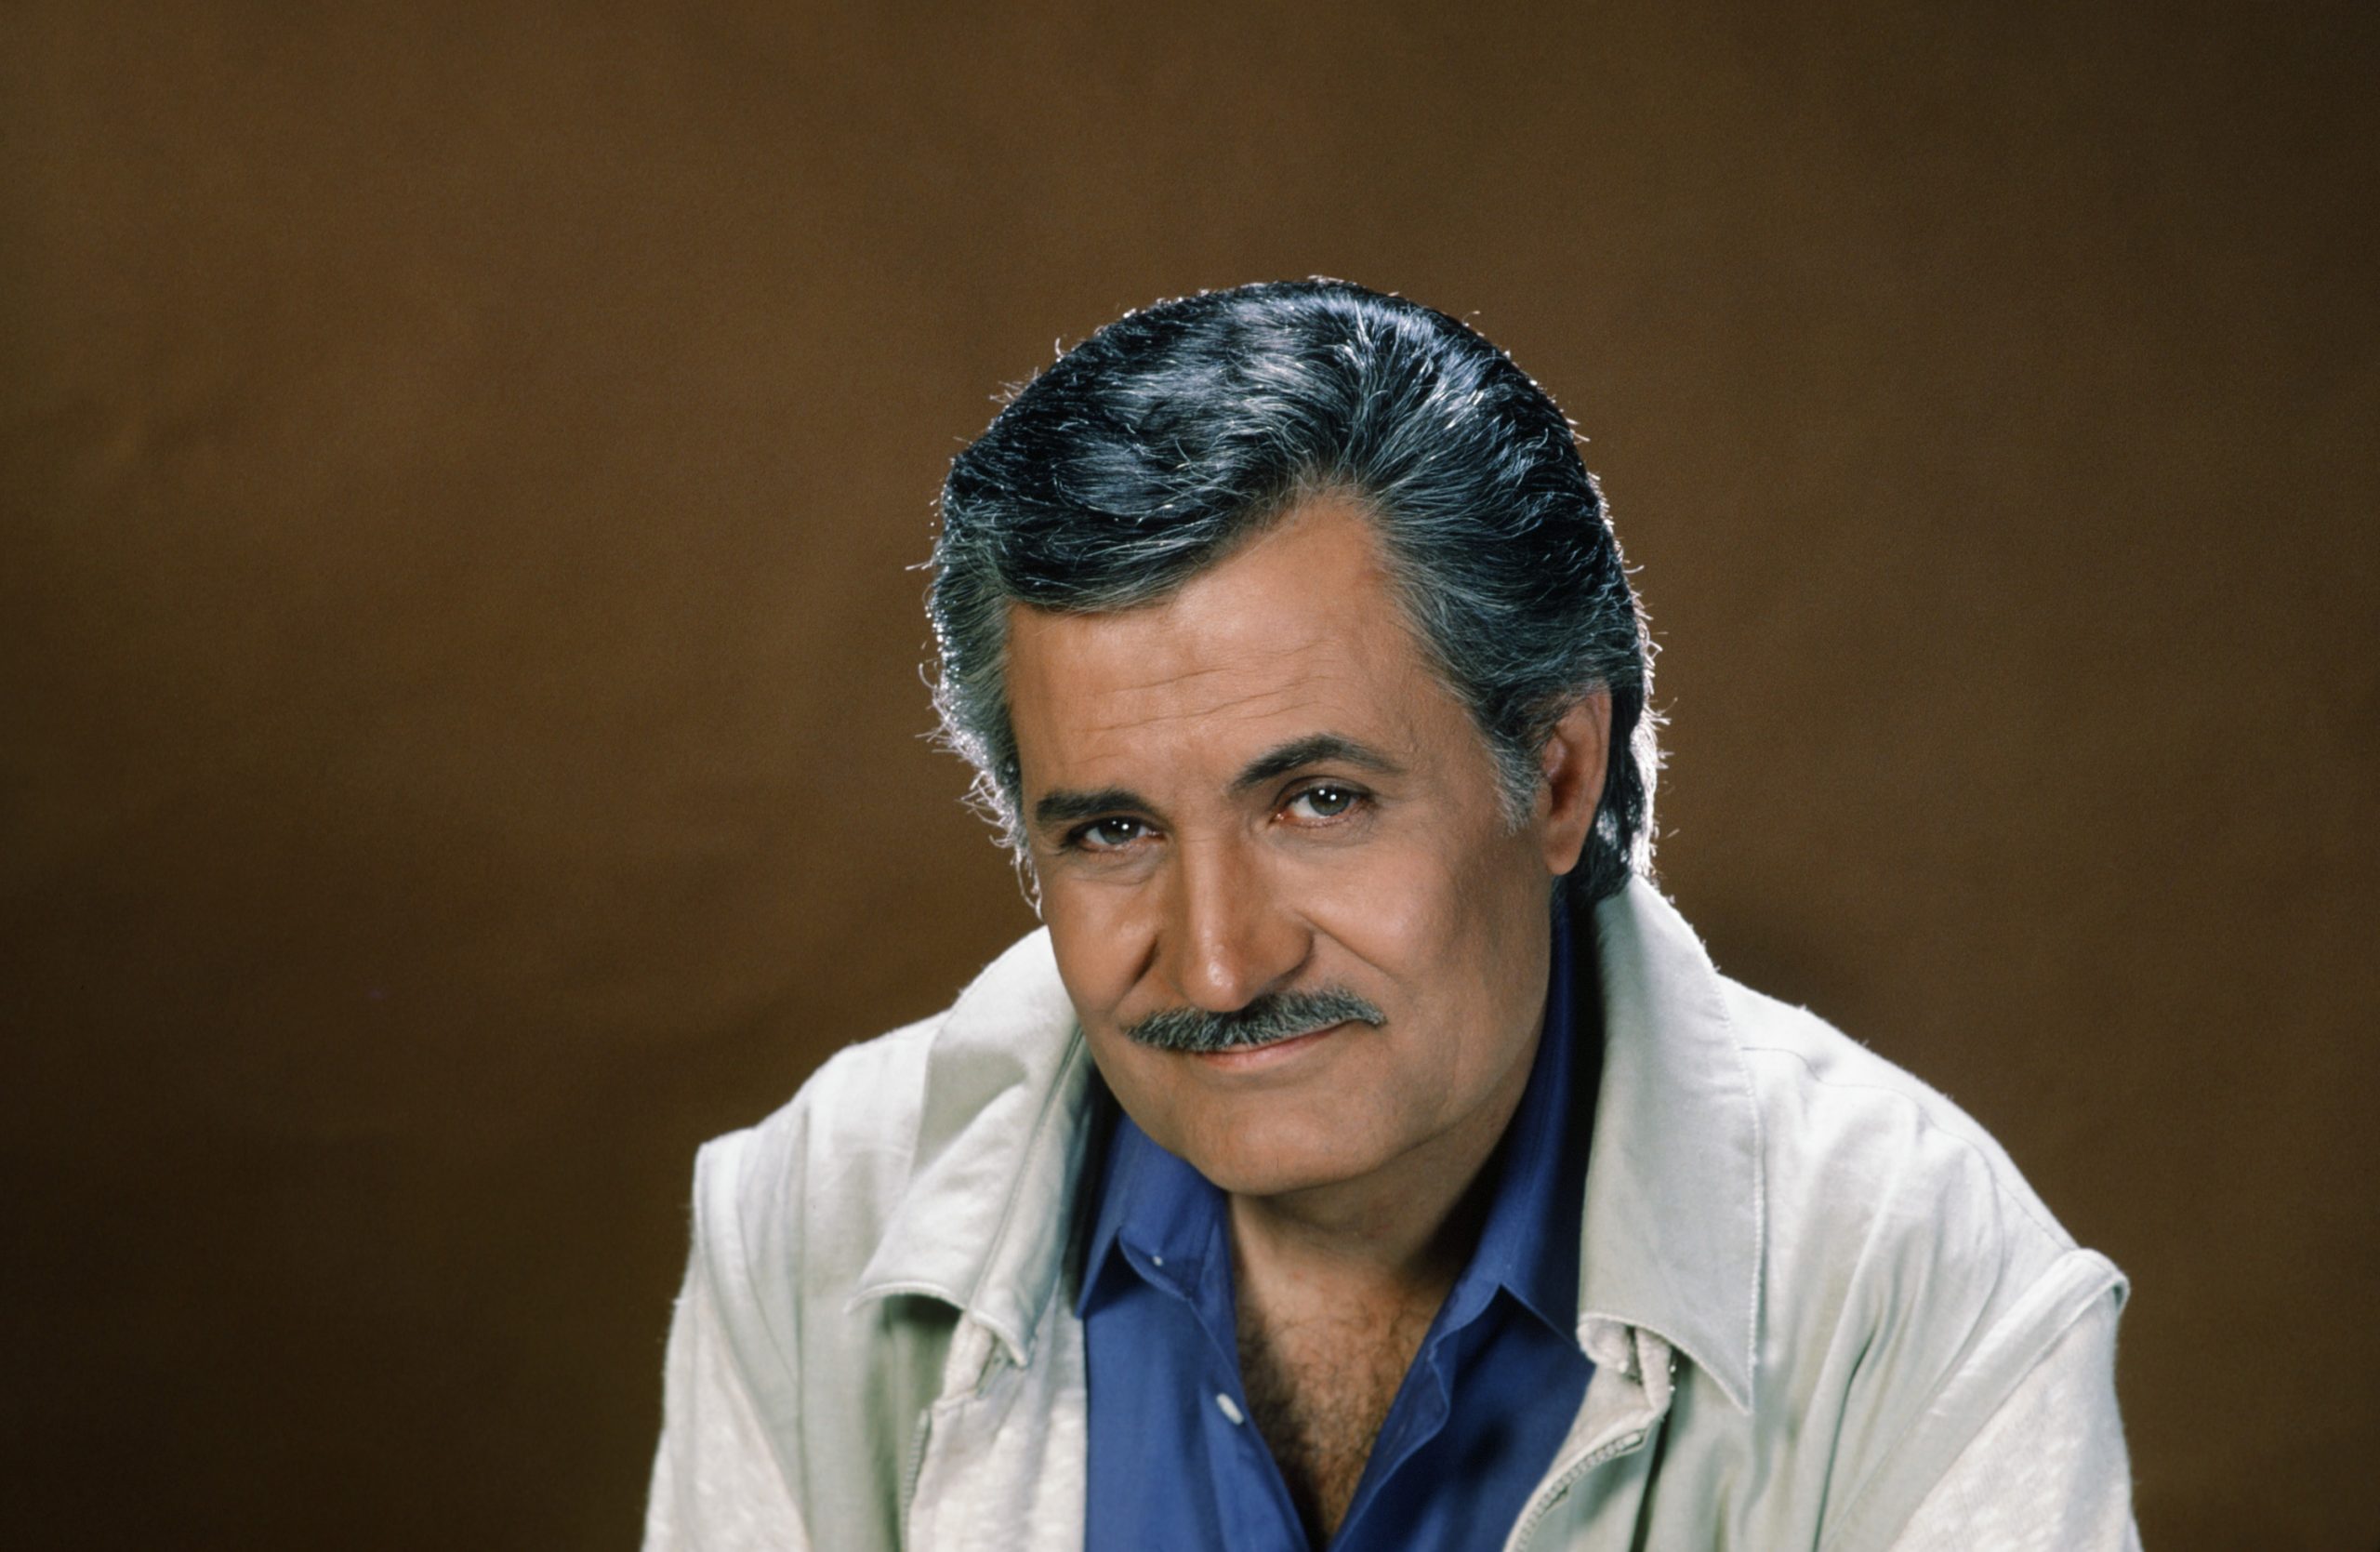 DAYS OF OUR LIVES -- Pictured: John Aniston as Victor Kiriakis -- (Photo by: Frank Carroll/NBCU Photo Bank/NBCUniversal via Getty Images via Getty Images)